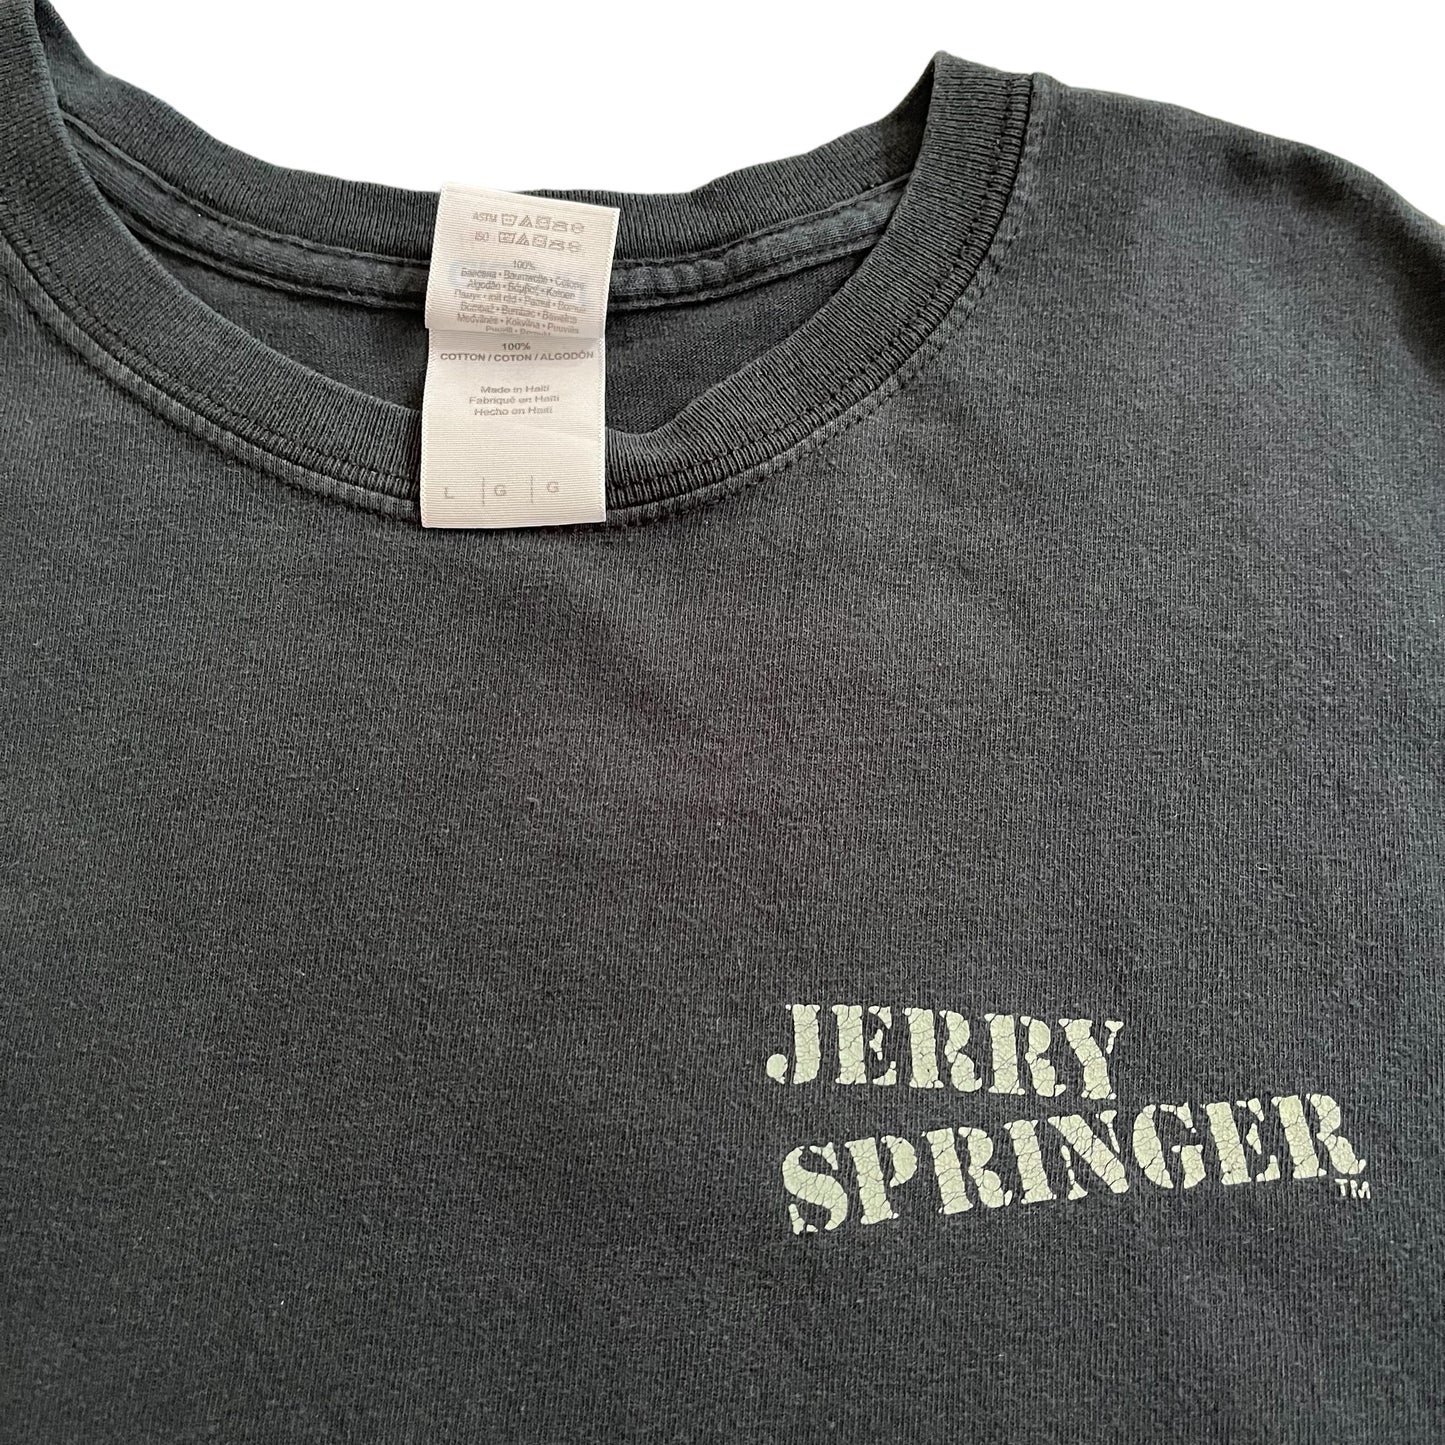 Jerry Springer tee large